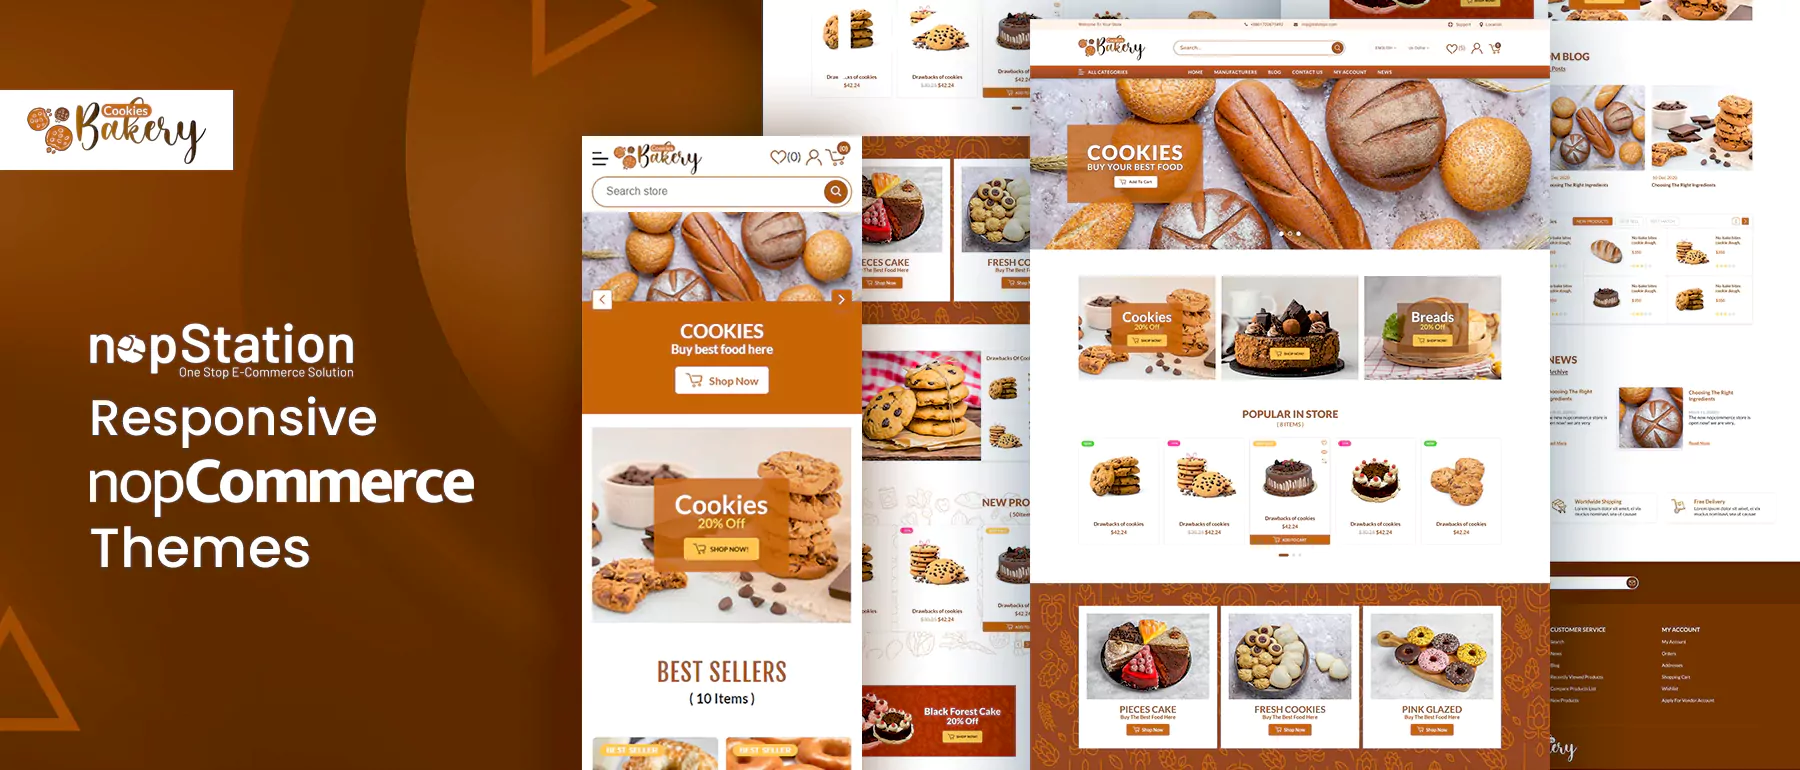 CookiesBakery-themes-banner